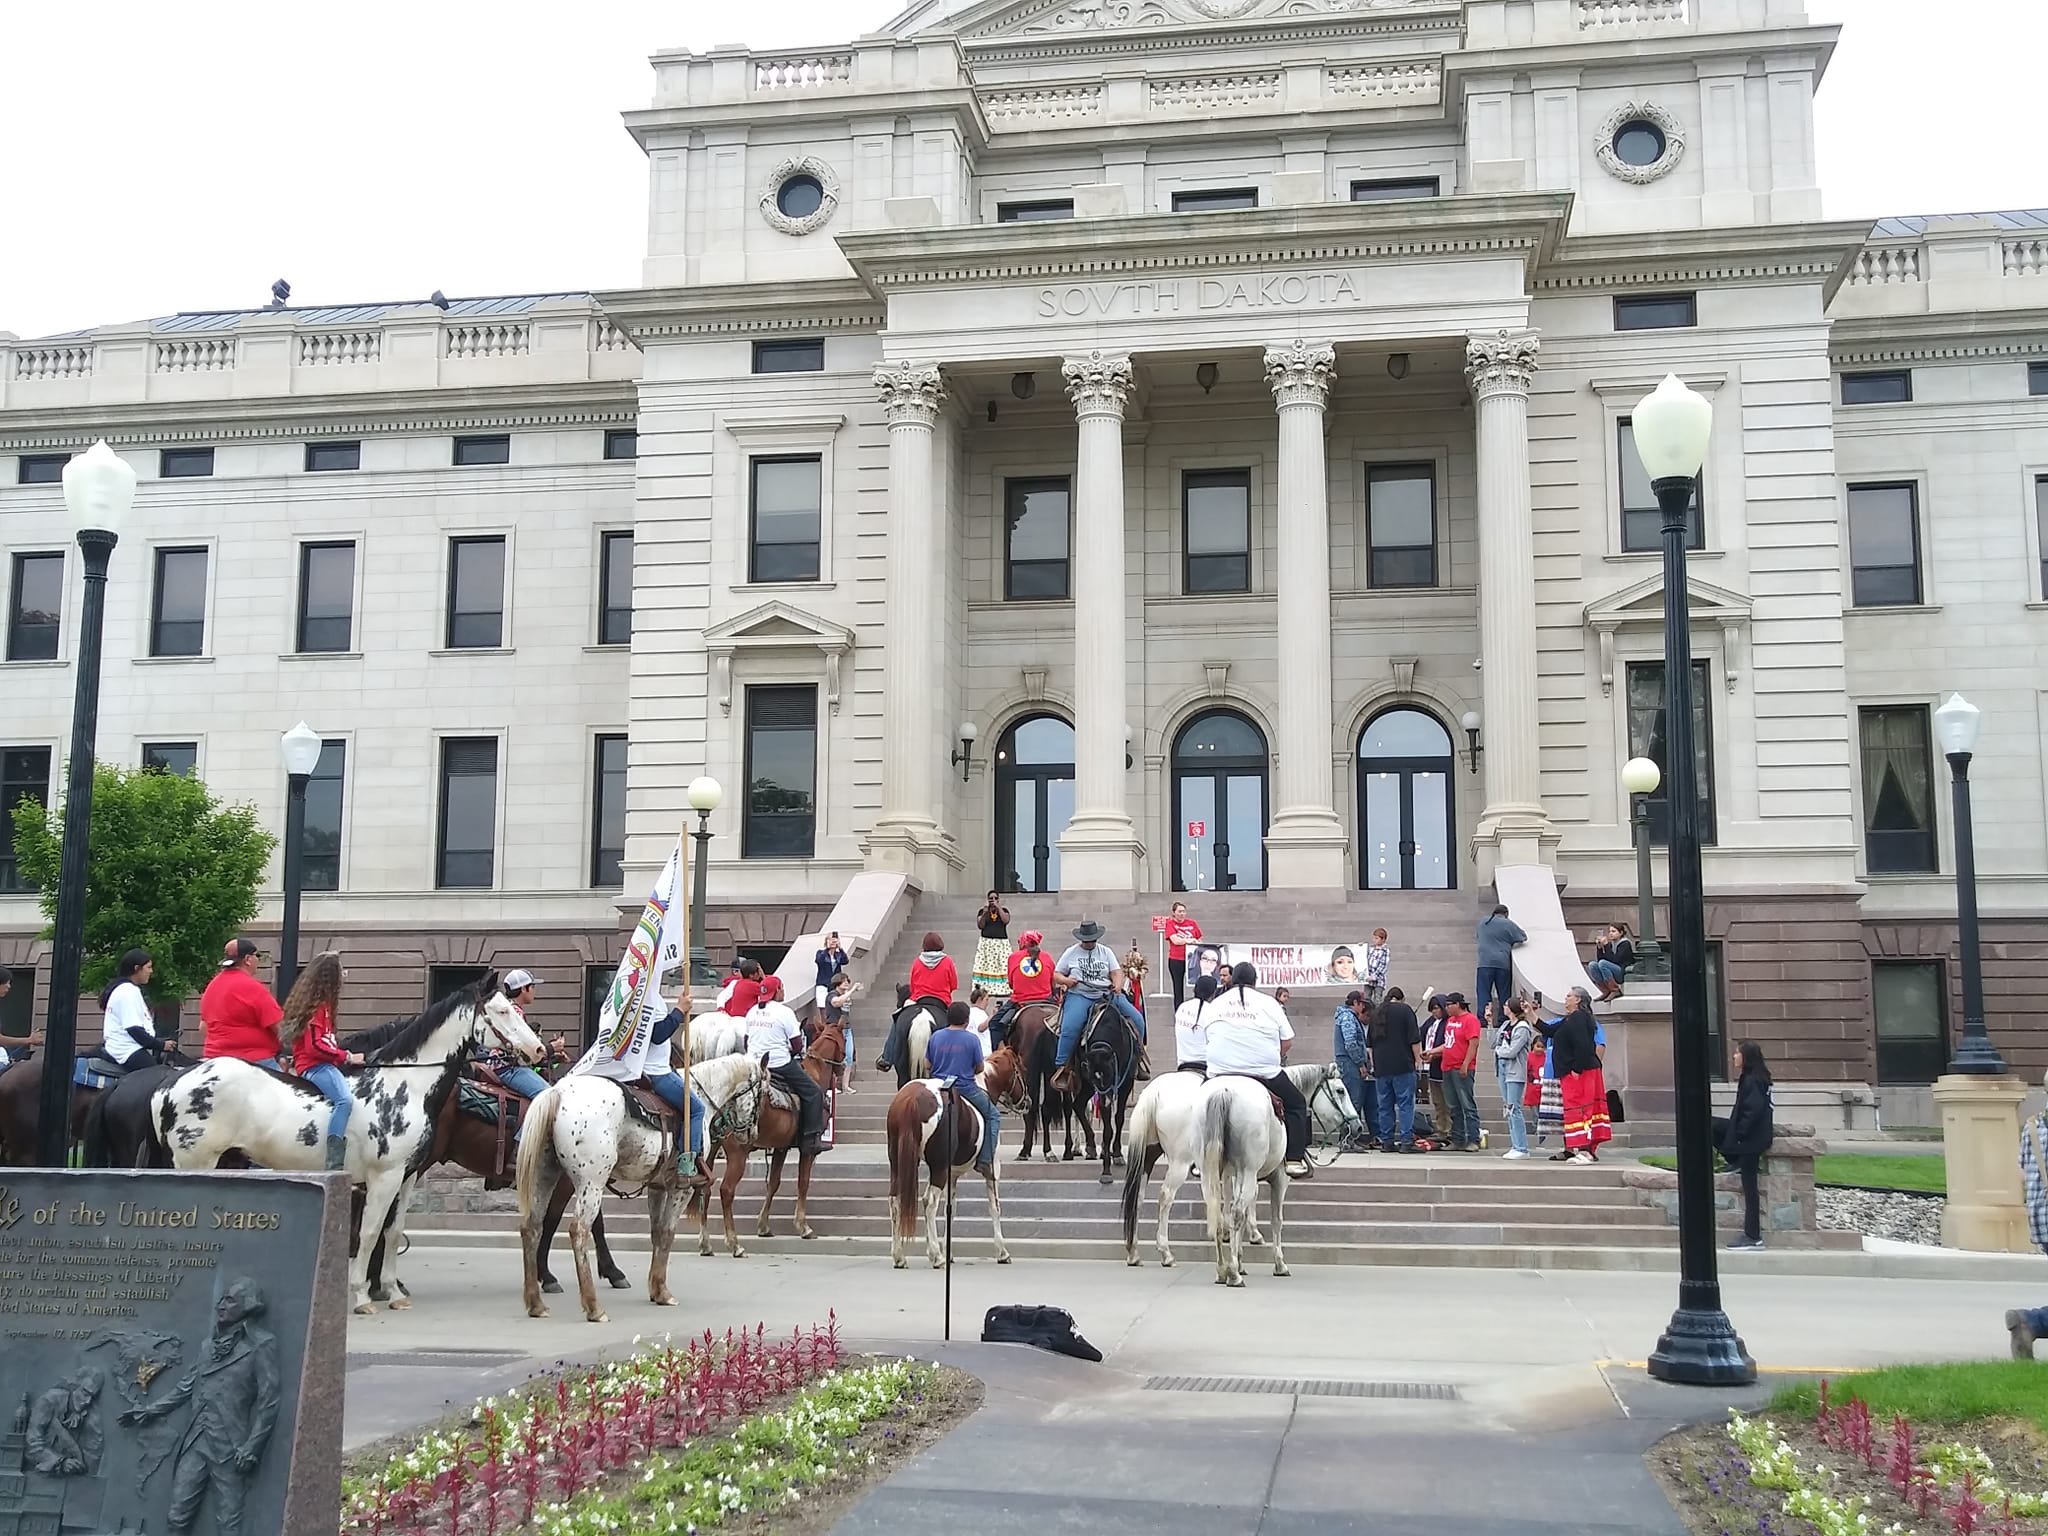 March For Awareness Of Missing And Murdered Indigenous Persons Ends At State Capitol Saturday